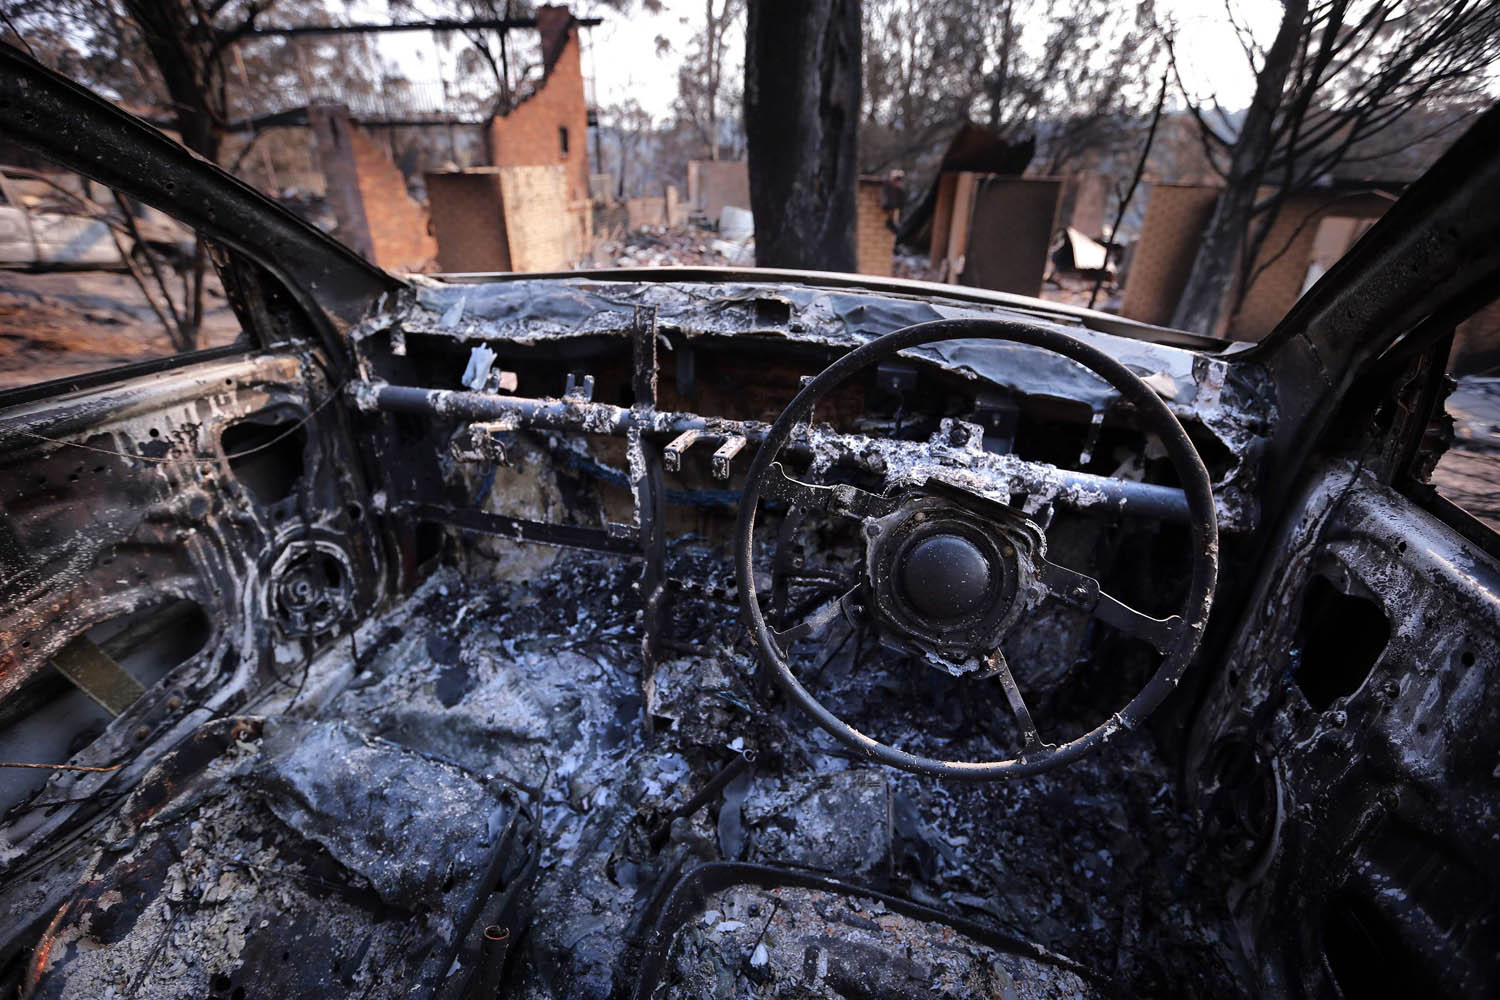 Burnt houses can be seen from inside a burnt-out car after they were destroyed by a bushfire in the Blue Mountains suburb of Winmalee